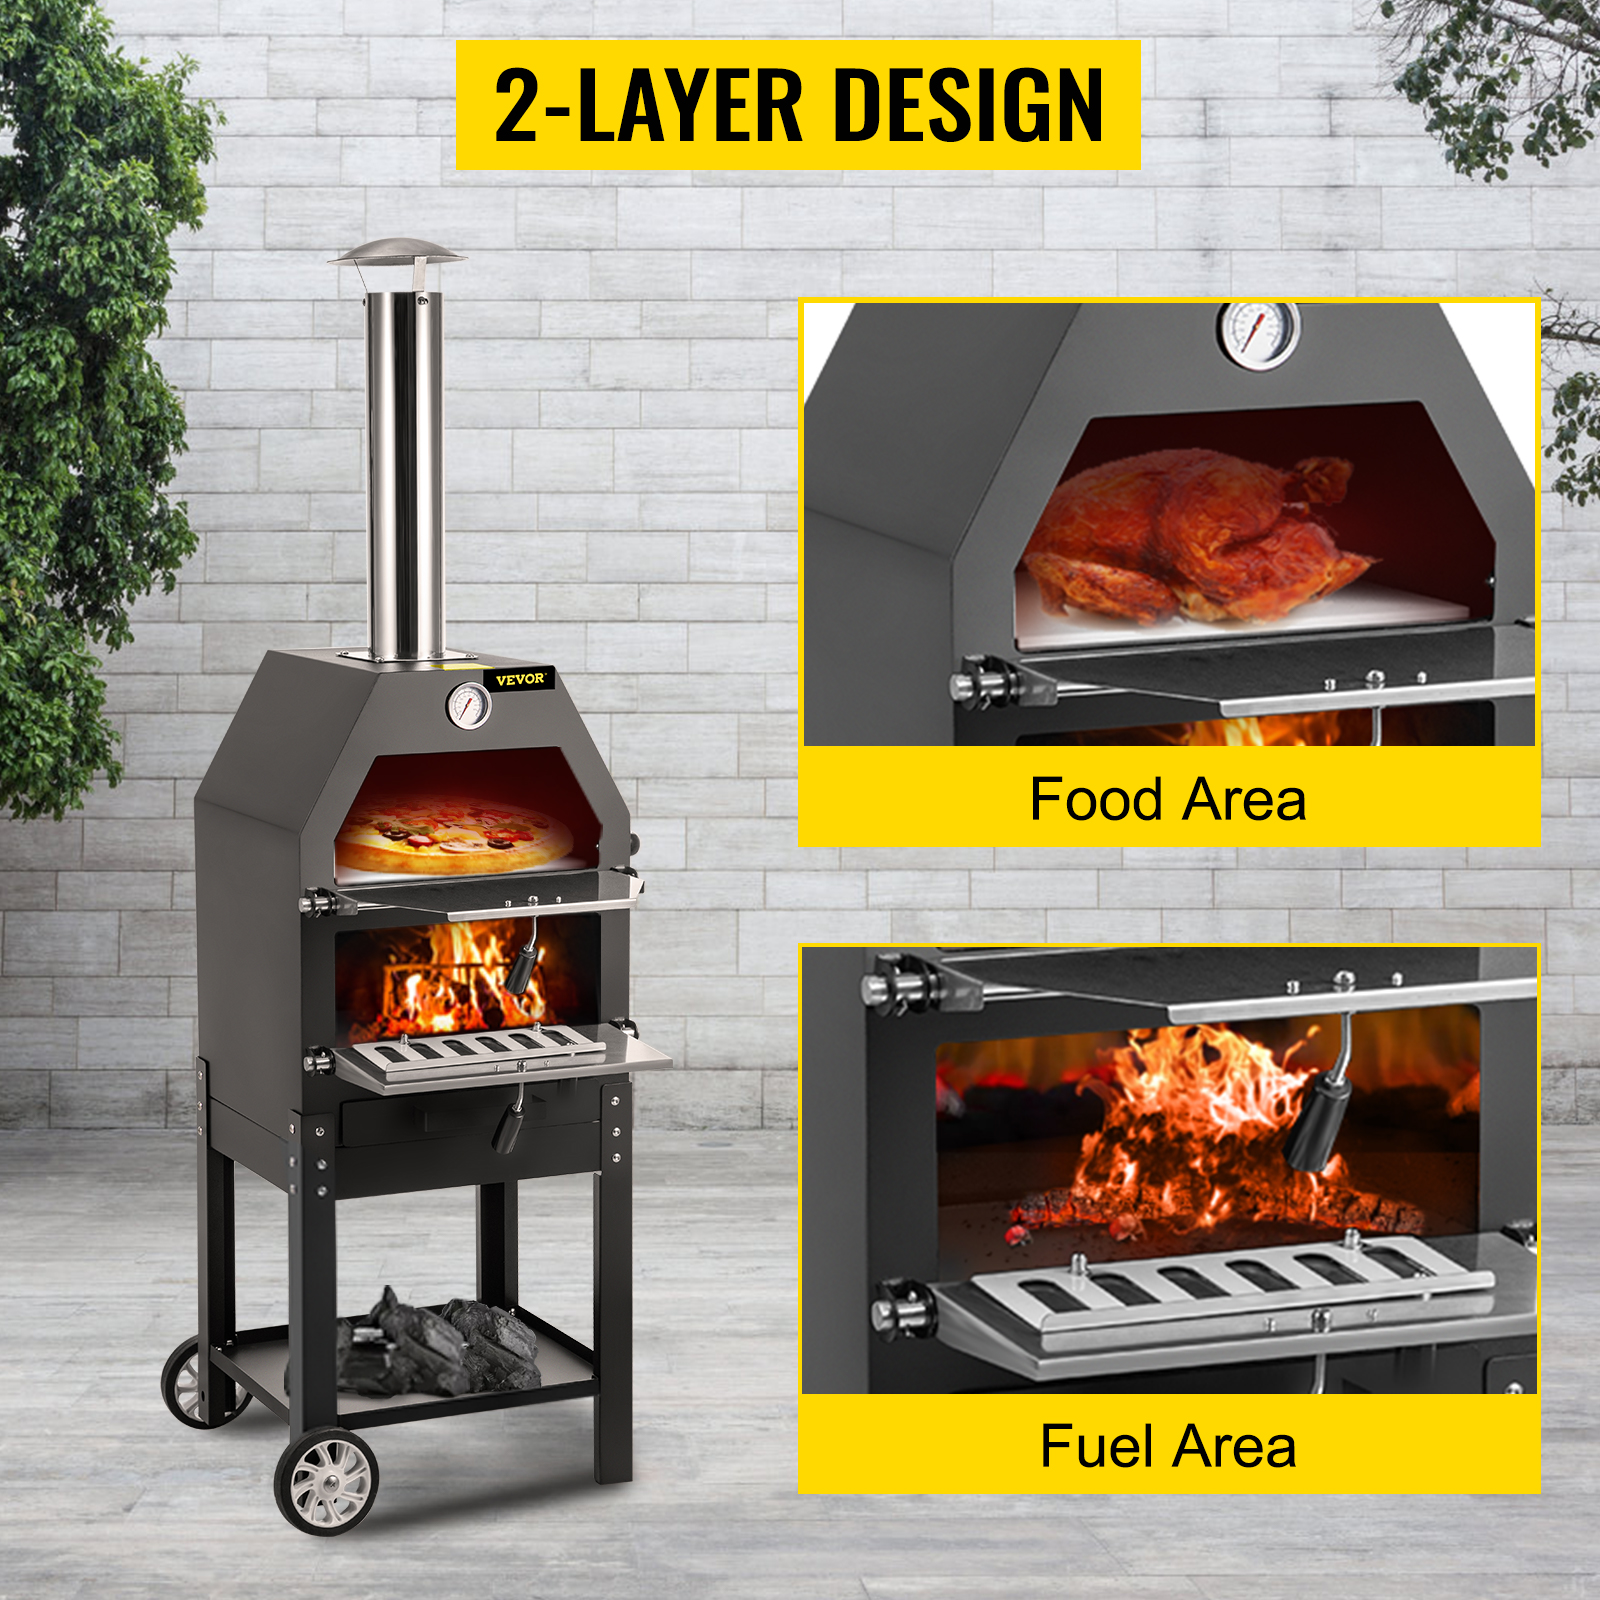 VEVOR Outdoor Pizza Oven, 12" Wood Fire Oven, 2-Layer Pizza Oven Wood Fired, Wood Burning Outdoor Pizza Oven with 2 Removable Wheels, Wood Fired Pizza Maker Ovens - image 3 of 9